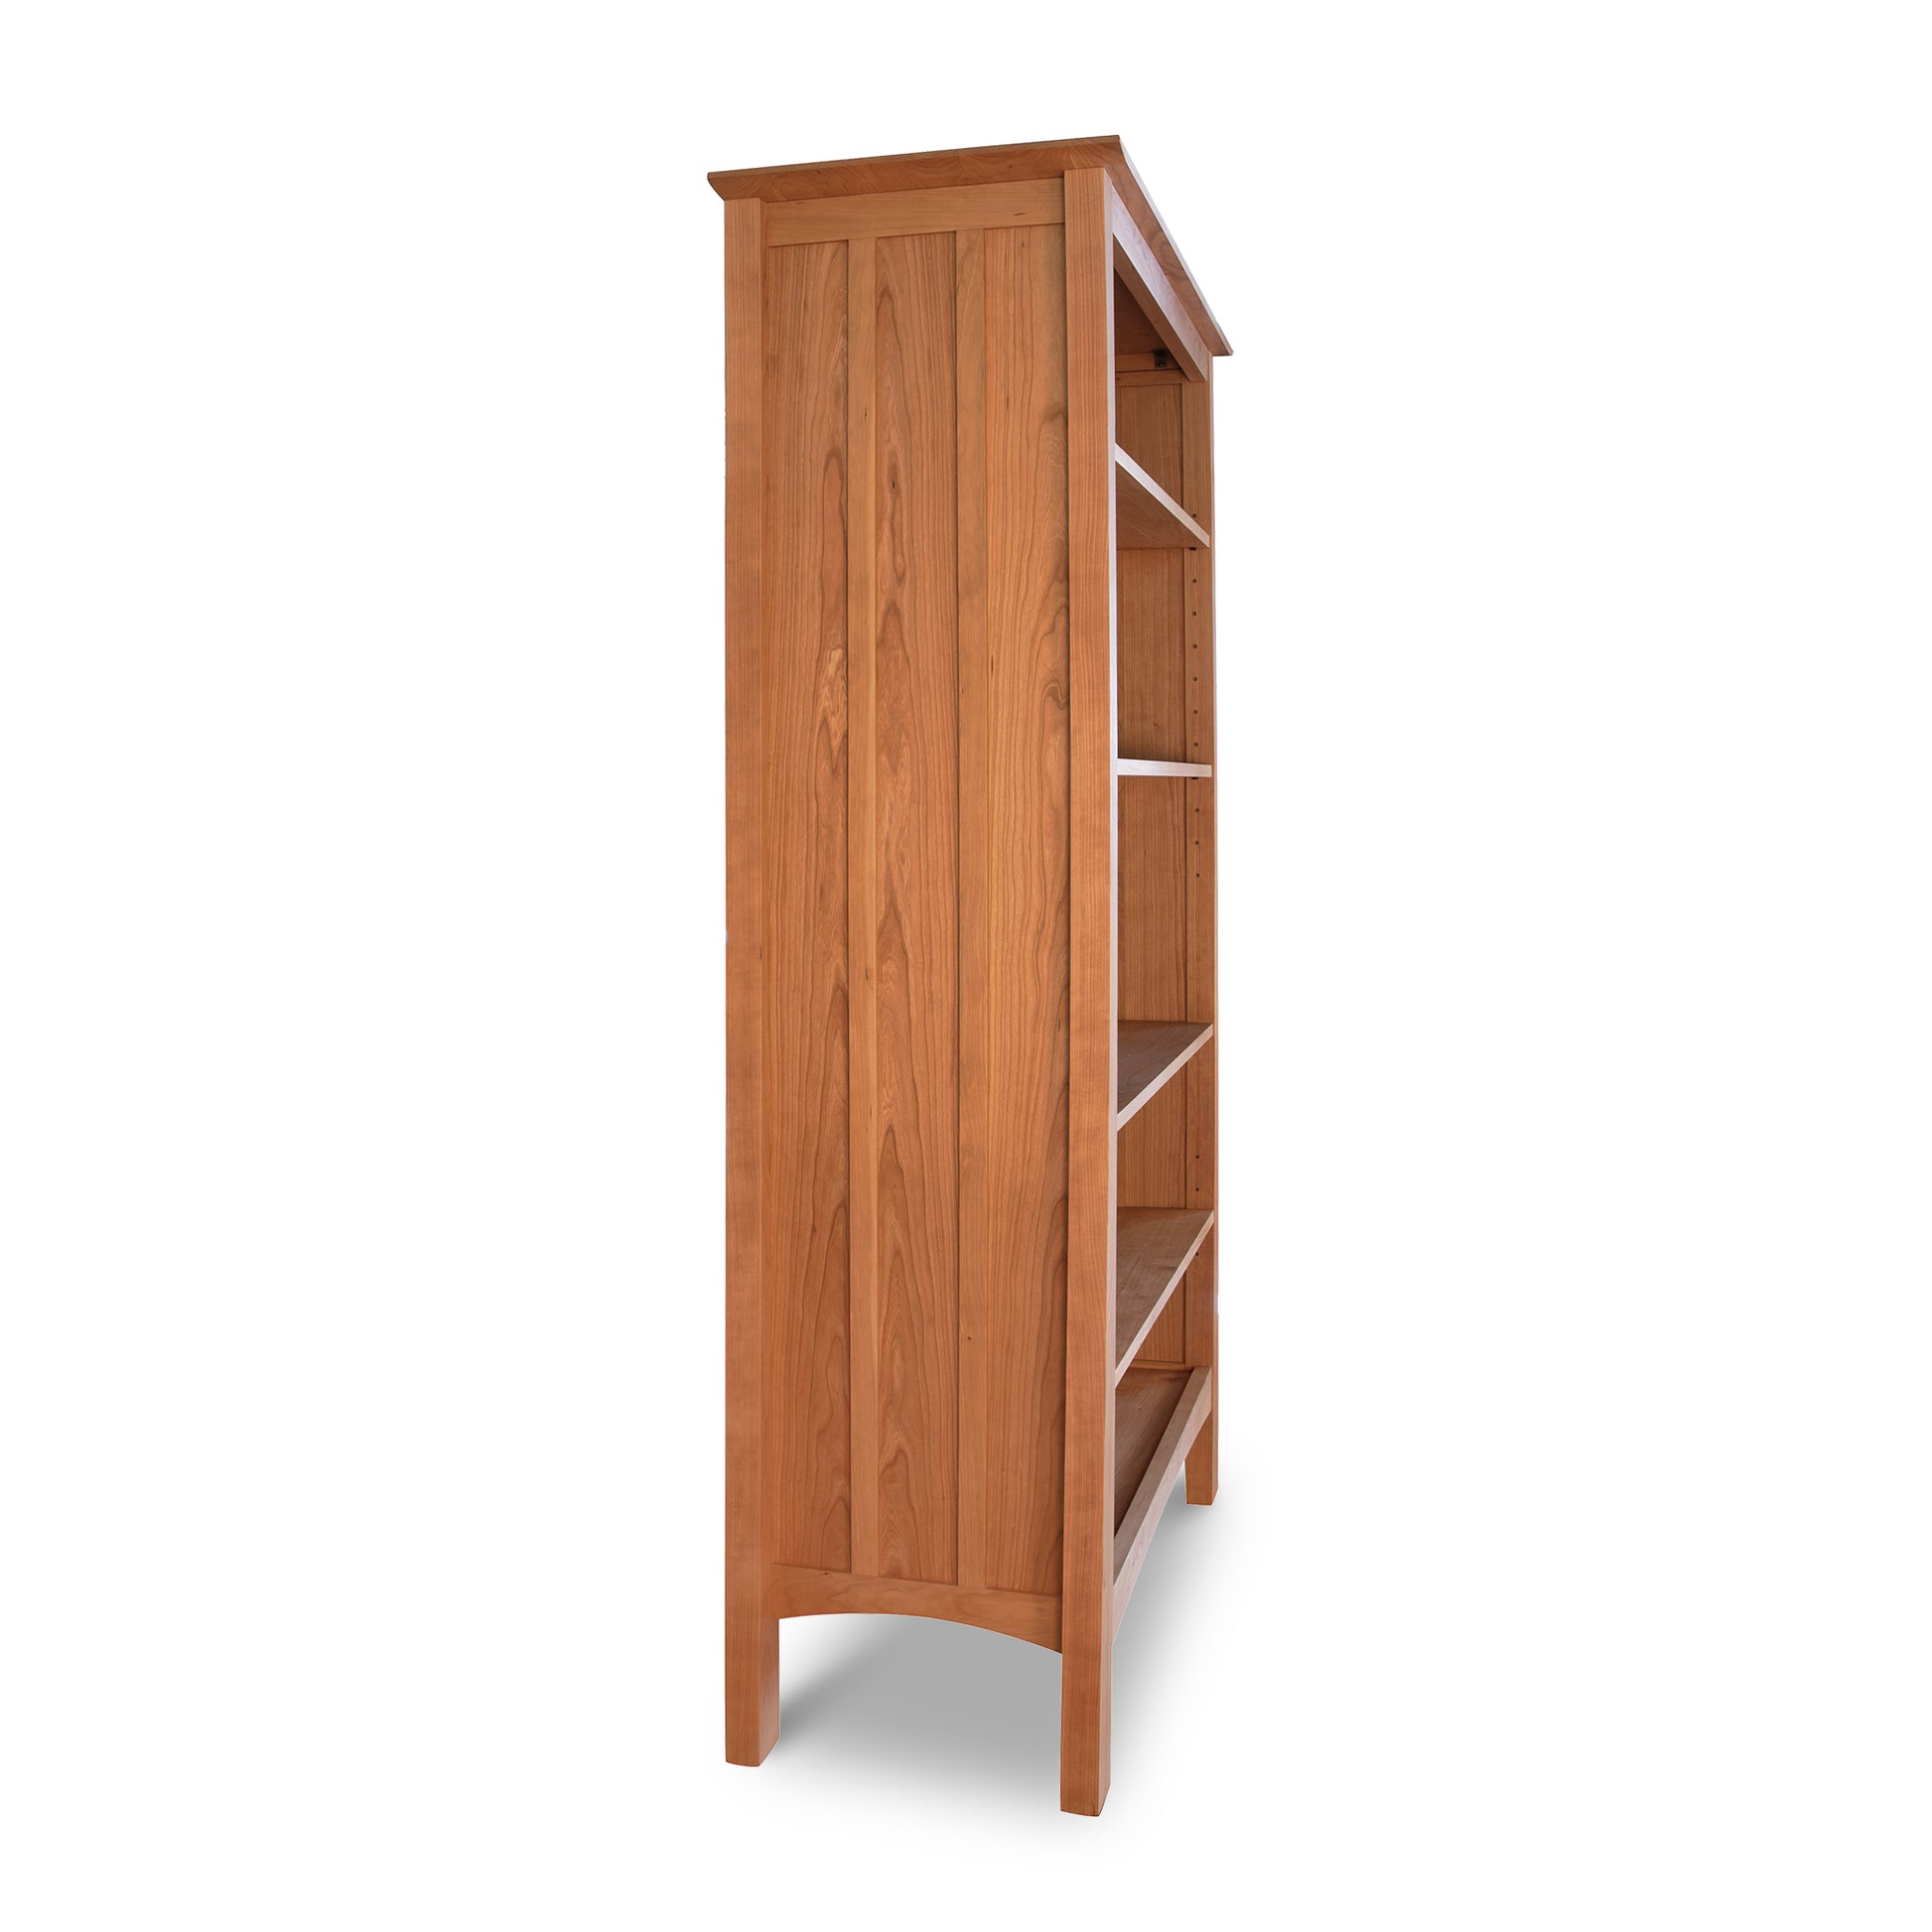 A tall Vermont Furniture Designs Contemporary Craftsman Custom Bookcase on a white background.